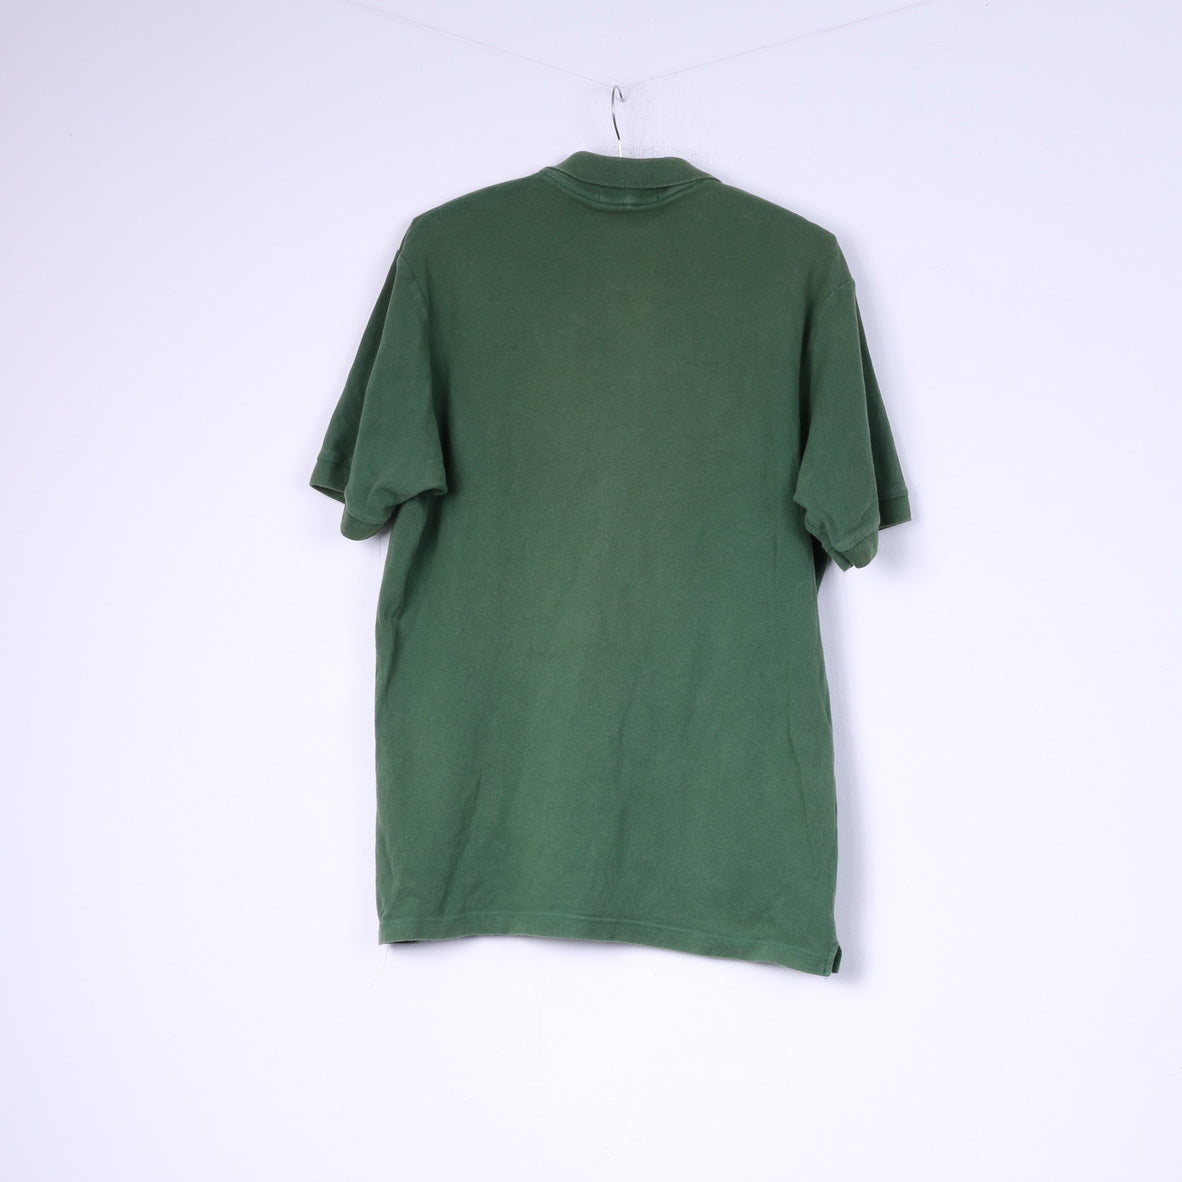 Burberrys Mens L Polo Shirt Green Top Buttons Detailed Cotton